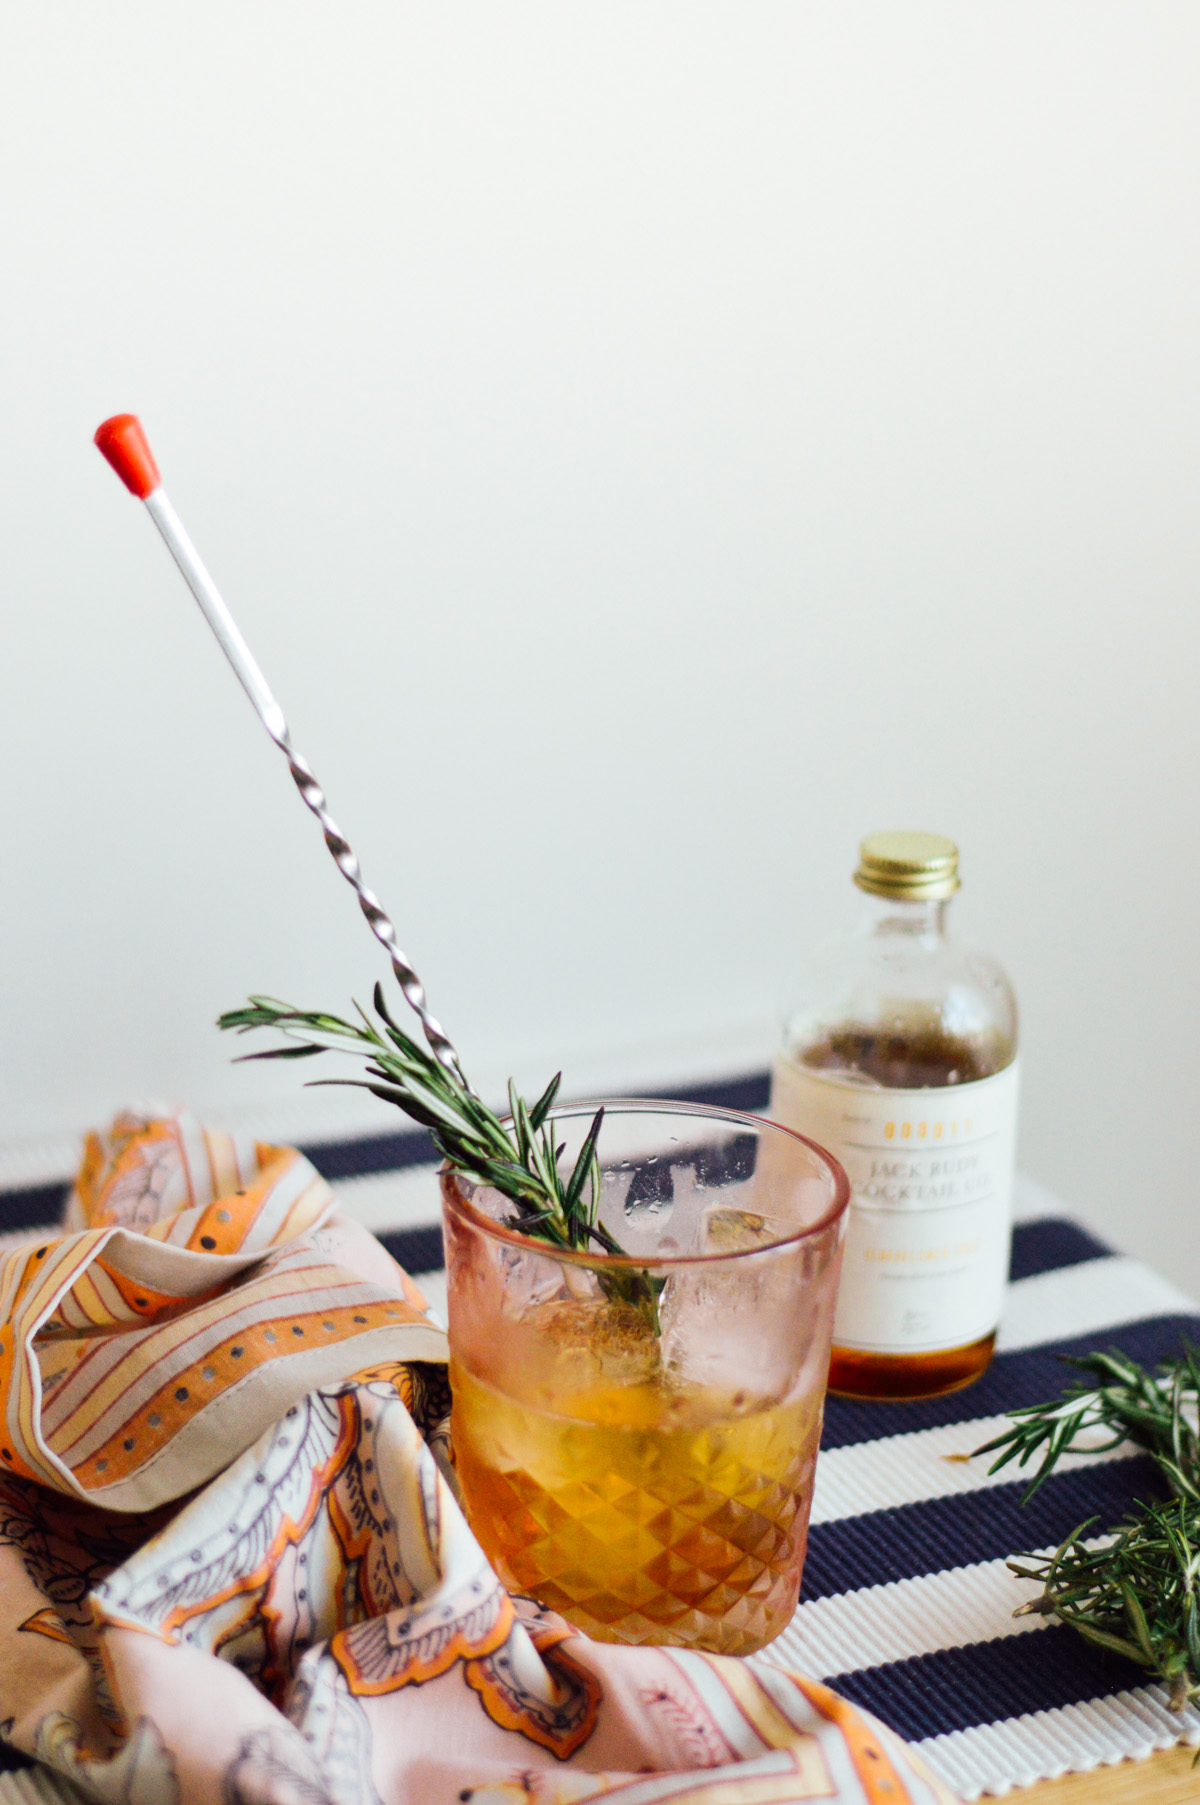 An Elderflower Whisky Cordial (easy!) cocktail recipe. Make your own with only 4 ingredients - and fresh rosemary for garnish! | bygabriella.co